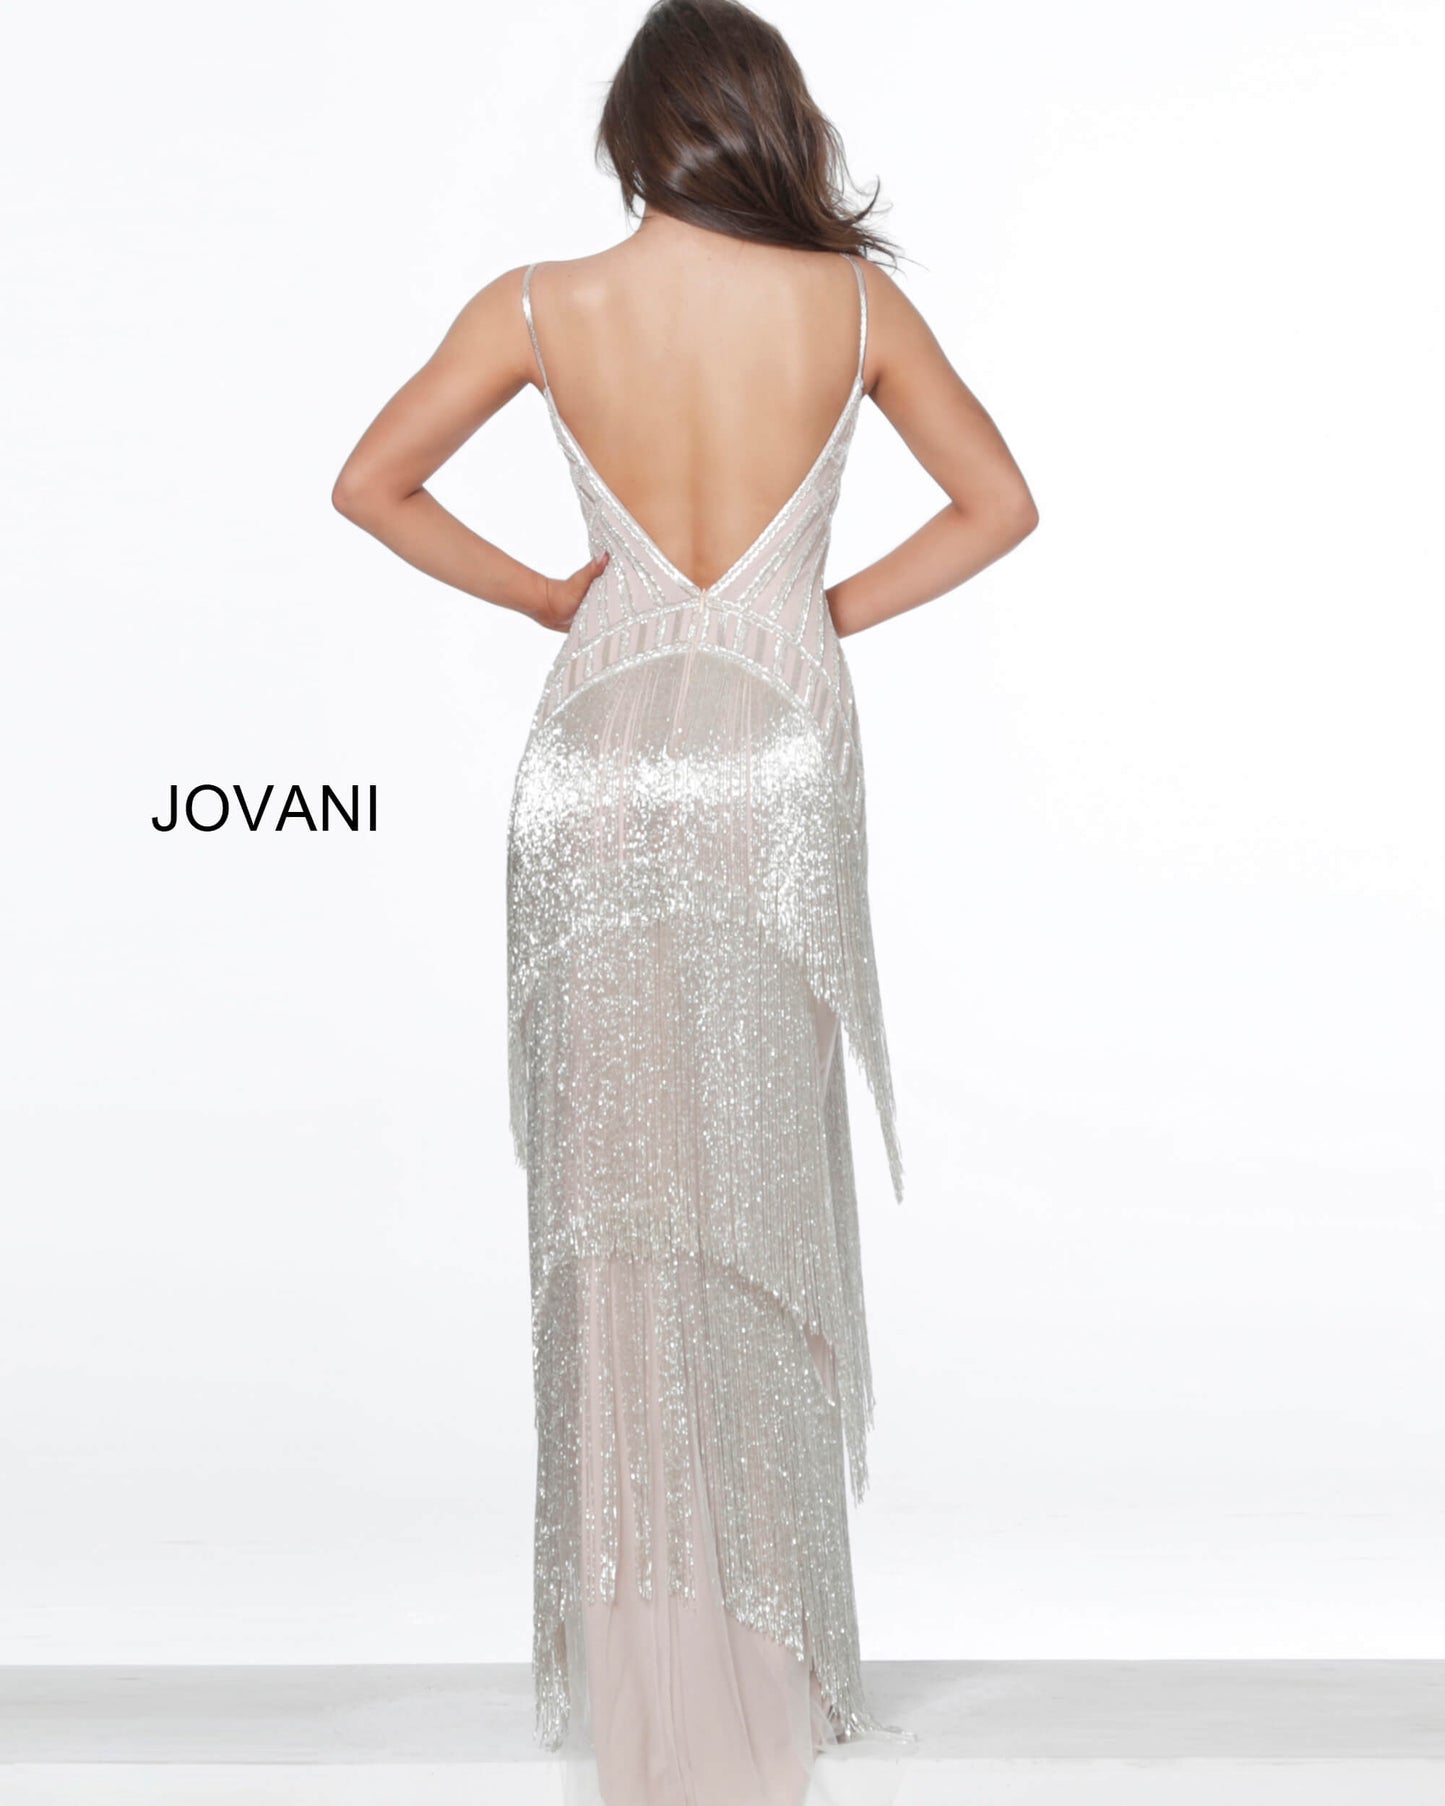 Jovani 8101 This evening gown is a silver nude prom dress features a fitted silhouette with linear sequin beadwork on the bodice and tiered fringe trim along the long skirt.  Spaghetti straps support the mesh insert plunging neckline and the open V-back. Make a statement at your next pageant or special event.  Color  Silver/Nude  Sizes  00, 0, 2, 4, 6, 8, 10, 12, 14, 16, 18, 20, 22, 24 